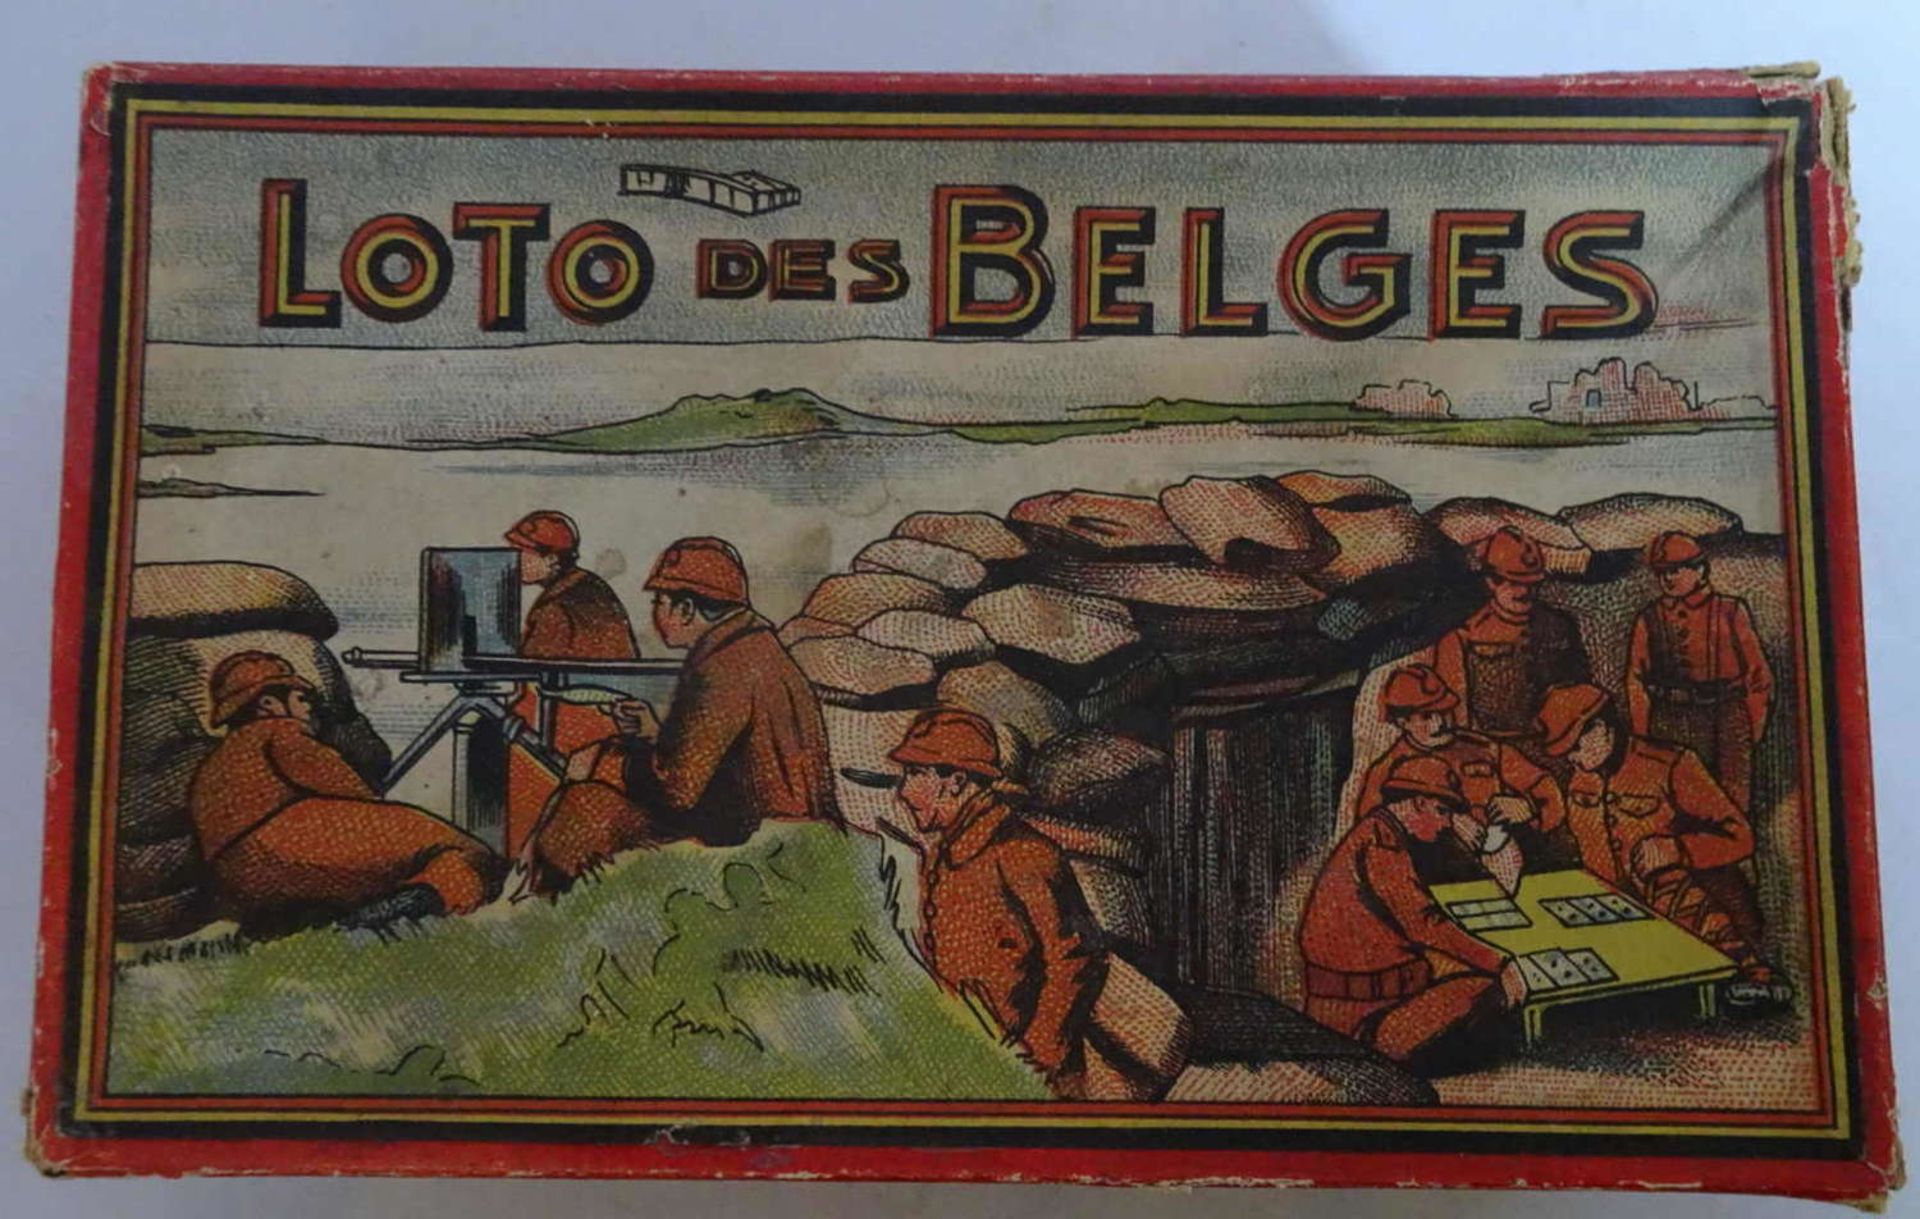 Belgian Lotto game with 24 cards and appealing wooden tiles and rectangular tiles for the fields.